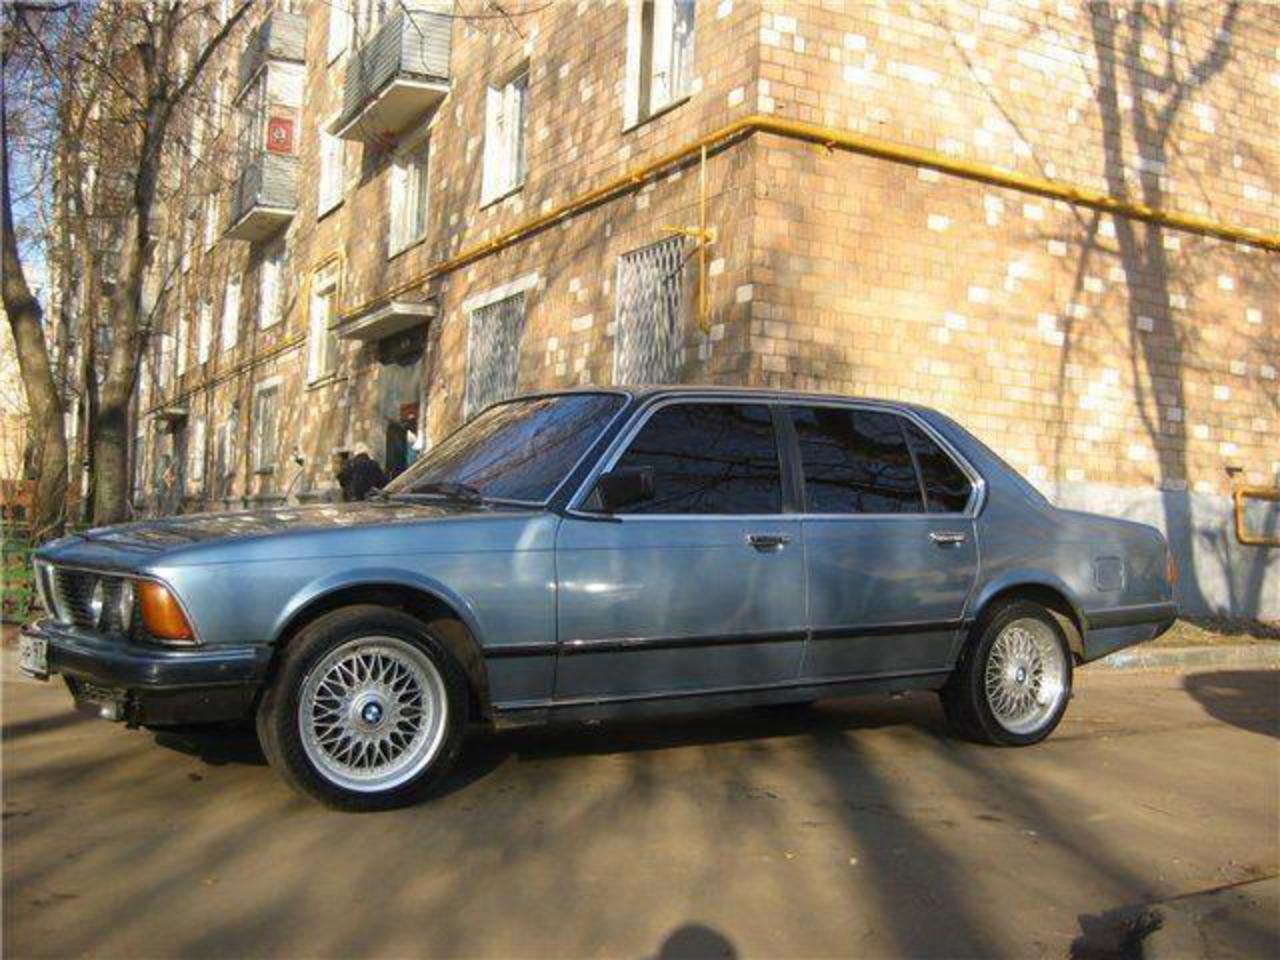 Photo Gallery (pictures, images): Car: bmw 732i. Article: Car: bmw 732i >